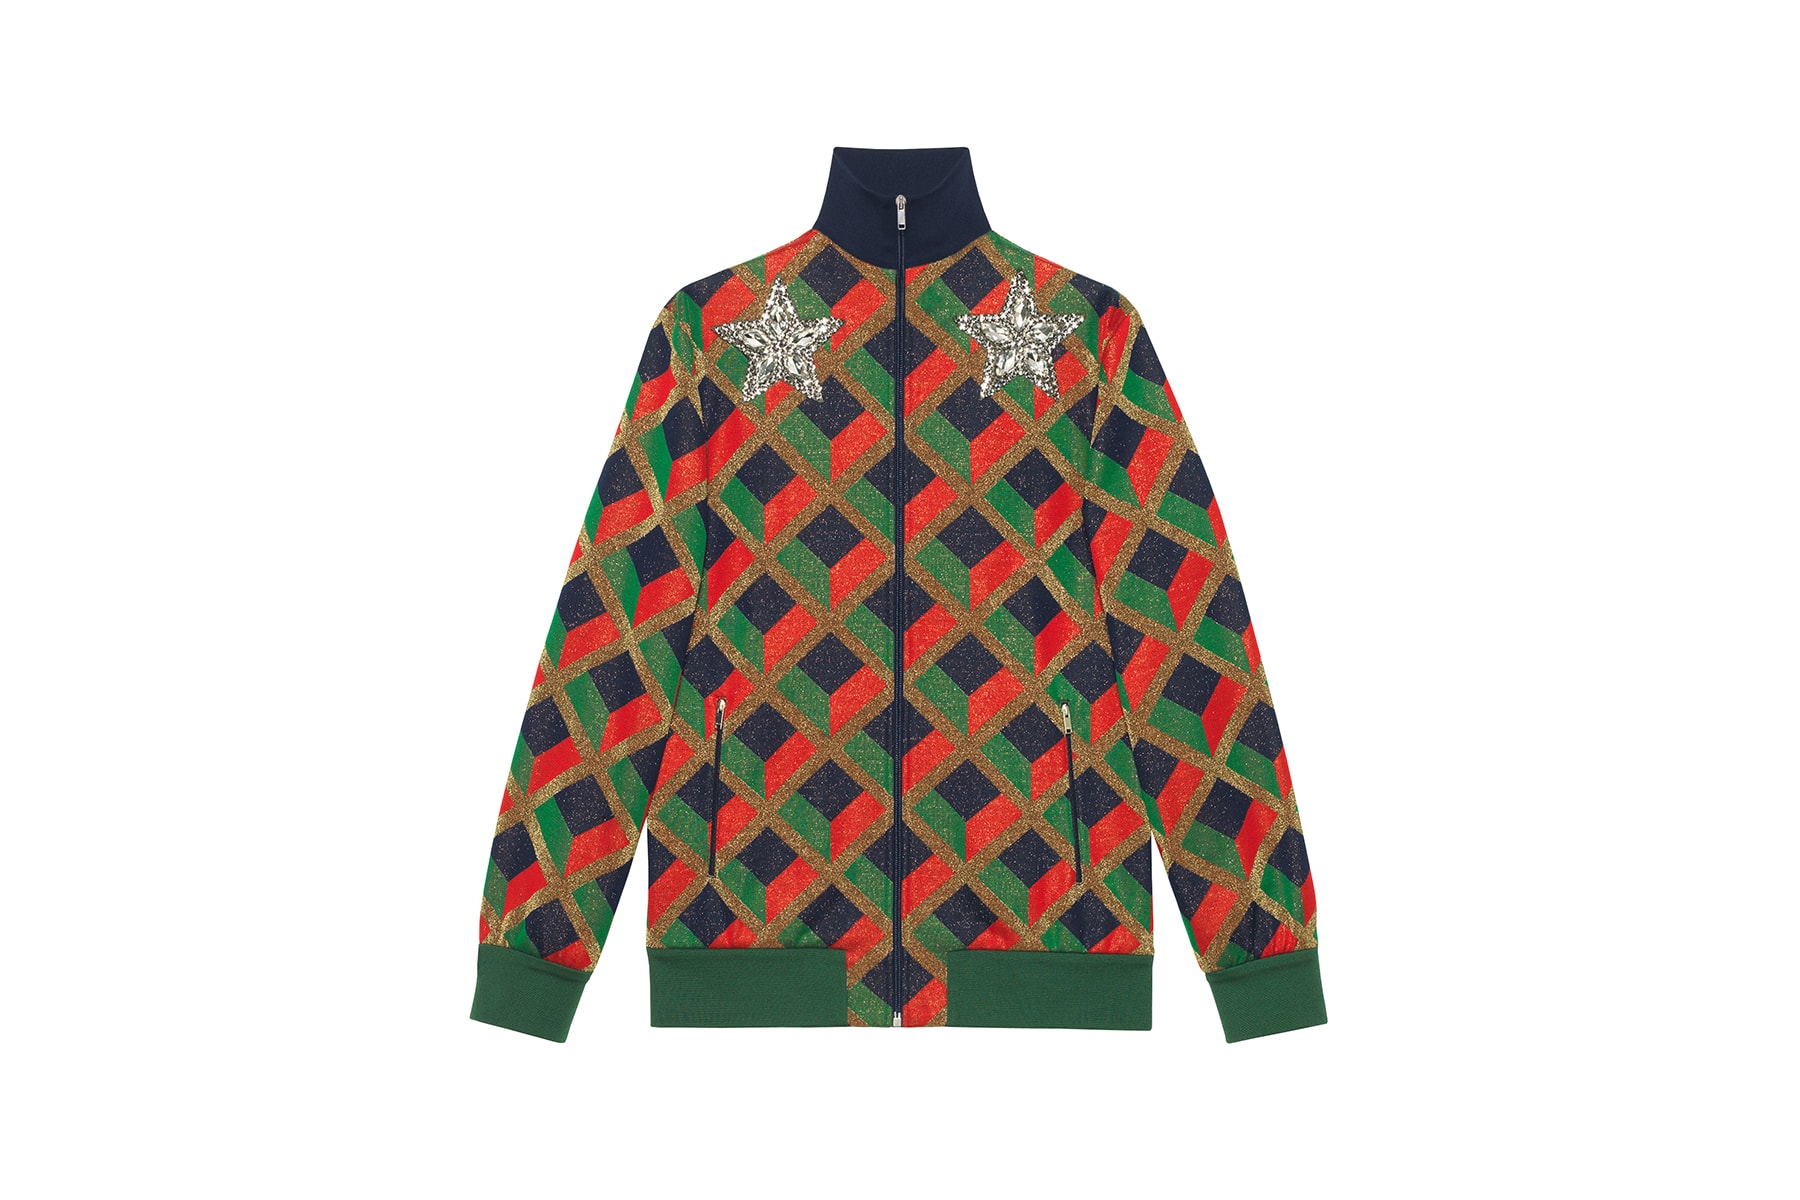 Gucci Pre-Fall 2018 Dover Street Market exclusives drop release collection july 14 2018 reopening buy purchase shop info decor sweater track jacket jersey shop store patches embroidery